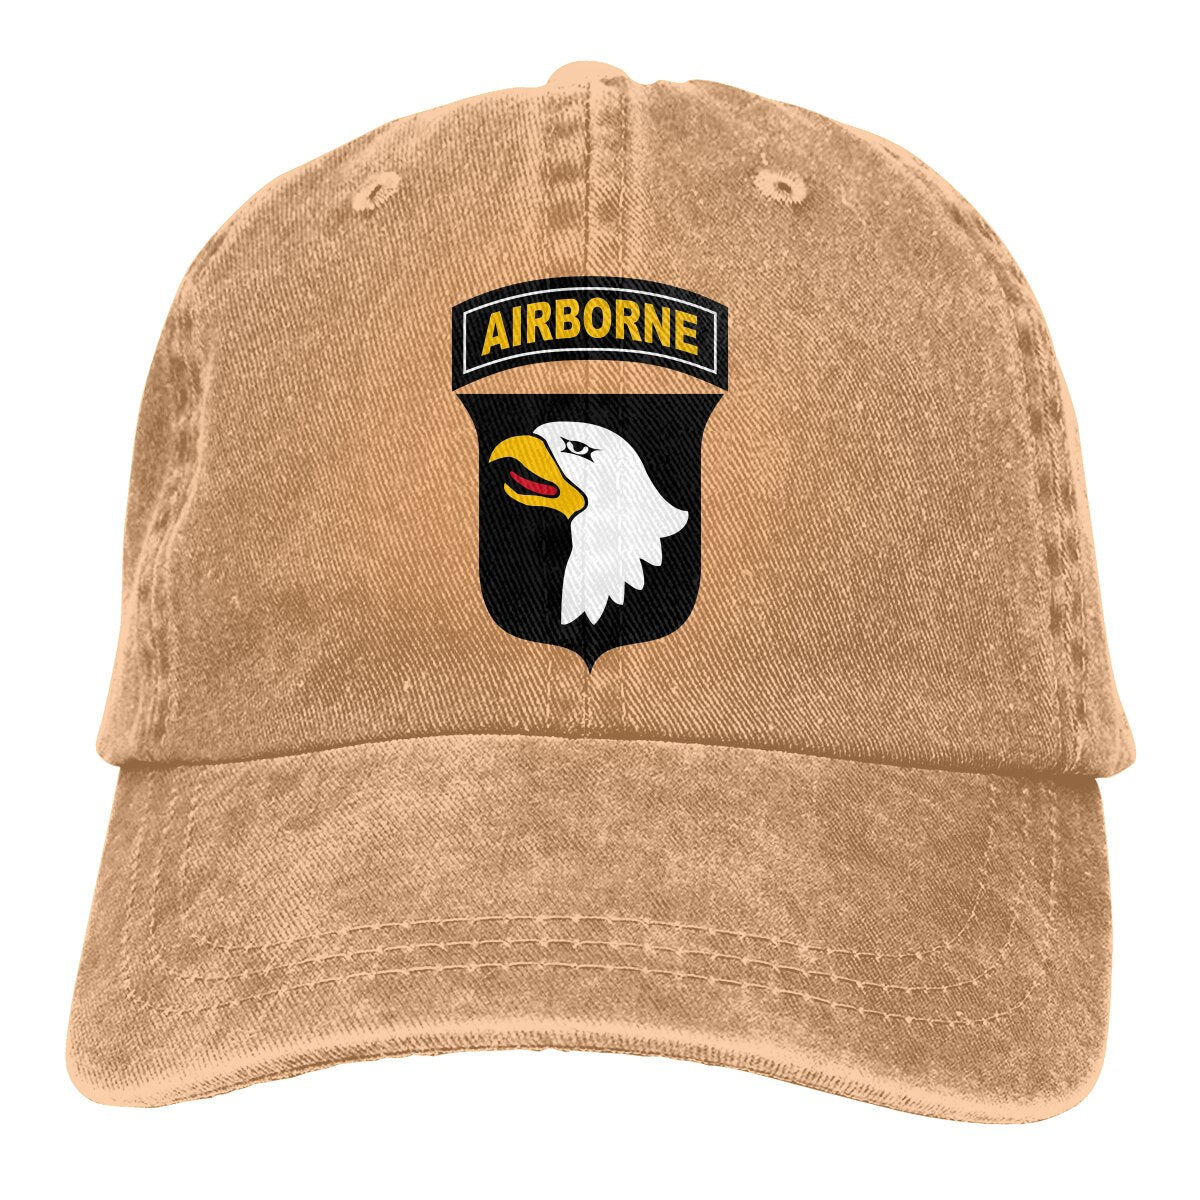 Adjustable Solid Color Baseball Cap 101st Airborne Division Washed Cotton ww2 WWII World War 2 Sports Woman Hat